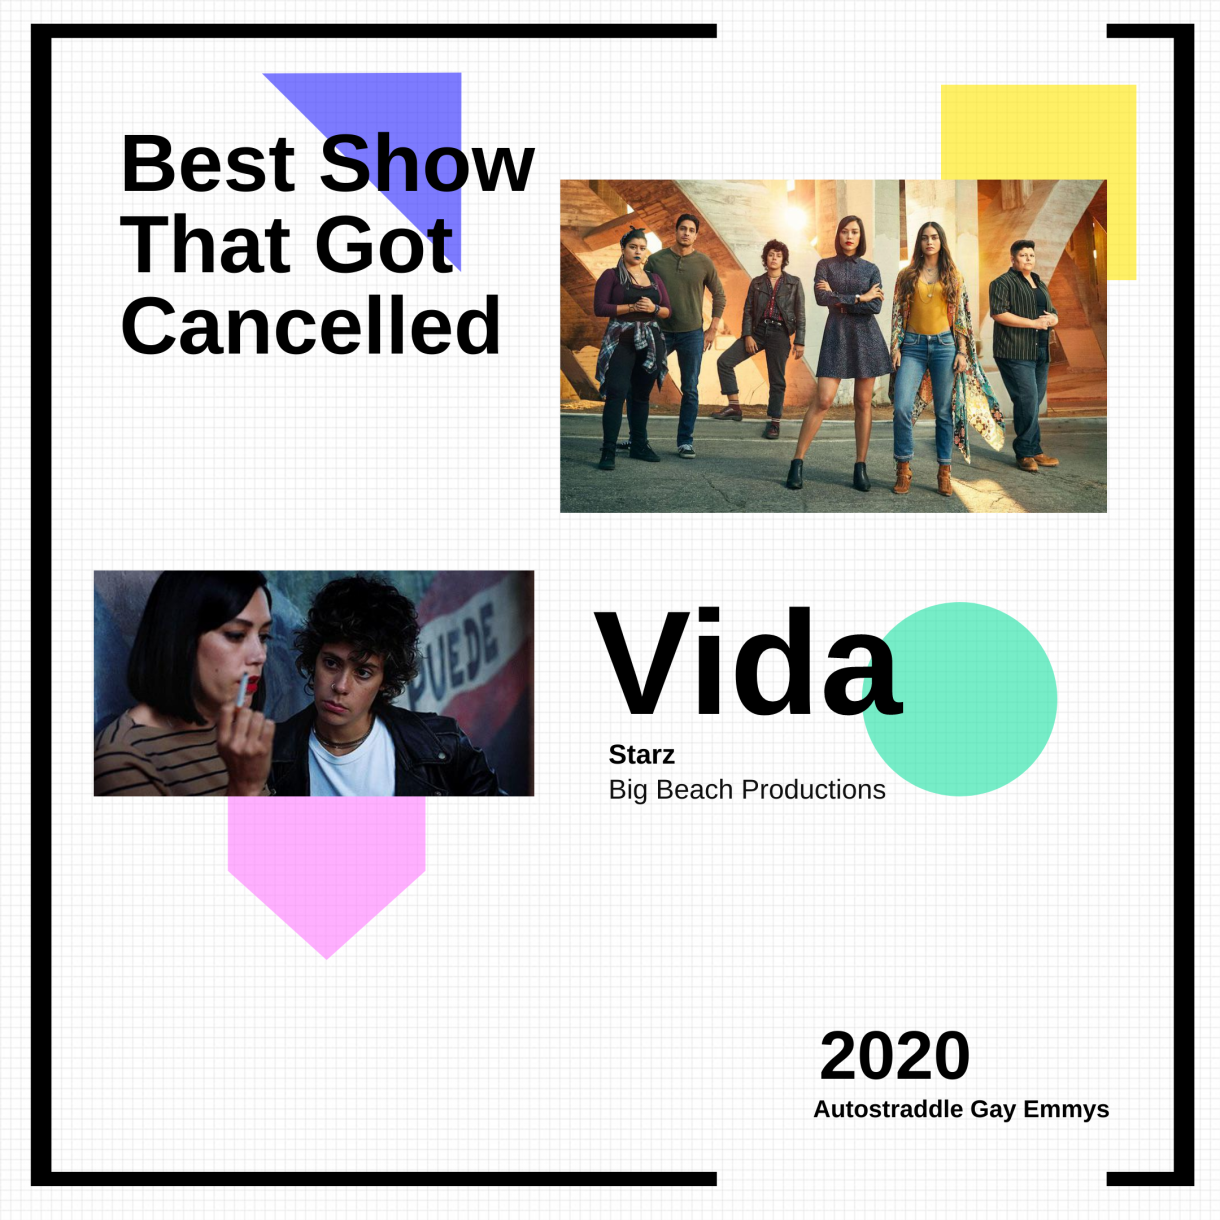 Graphic announcing winner of "Best Show that Got Cancelled," Vida